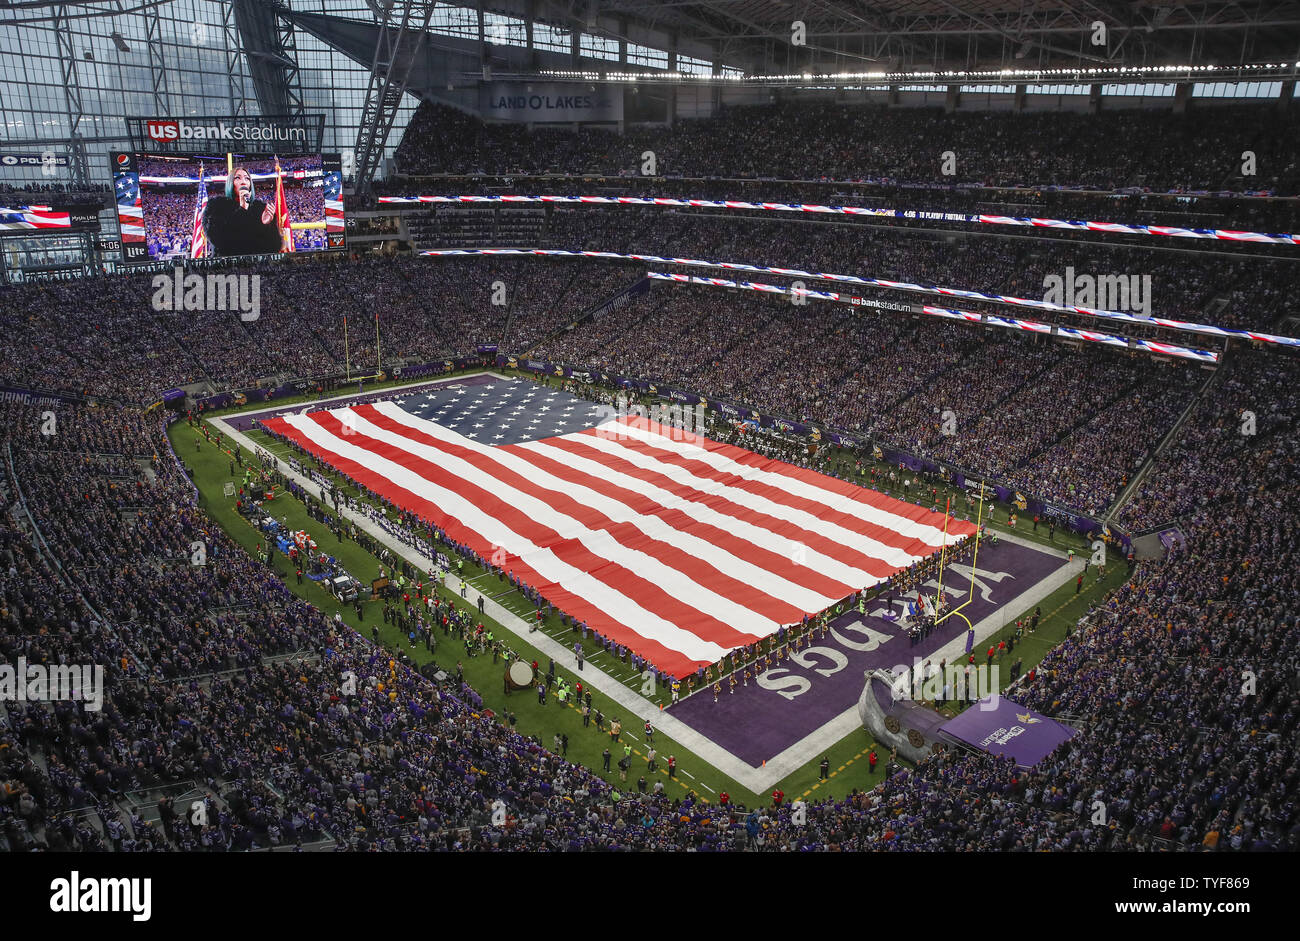 Vikings look forward to 'amped-up' U.S. Bank Stadium for playoffs